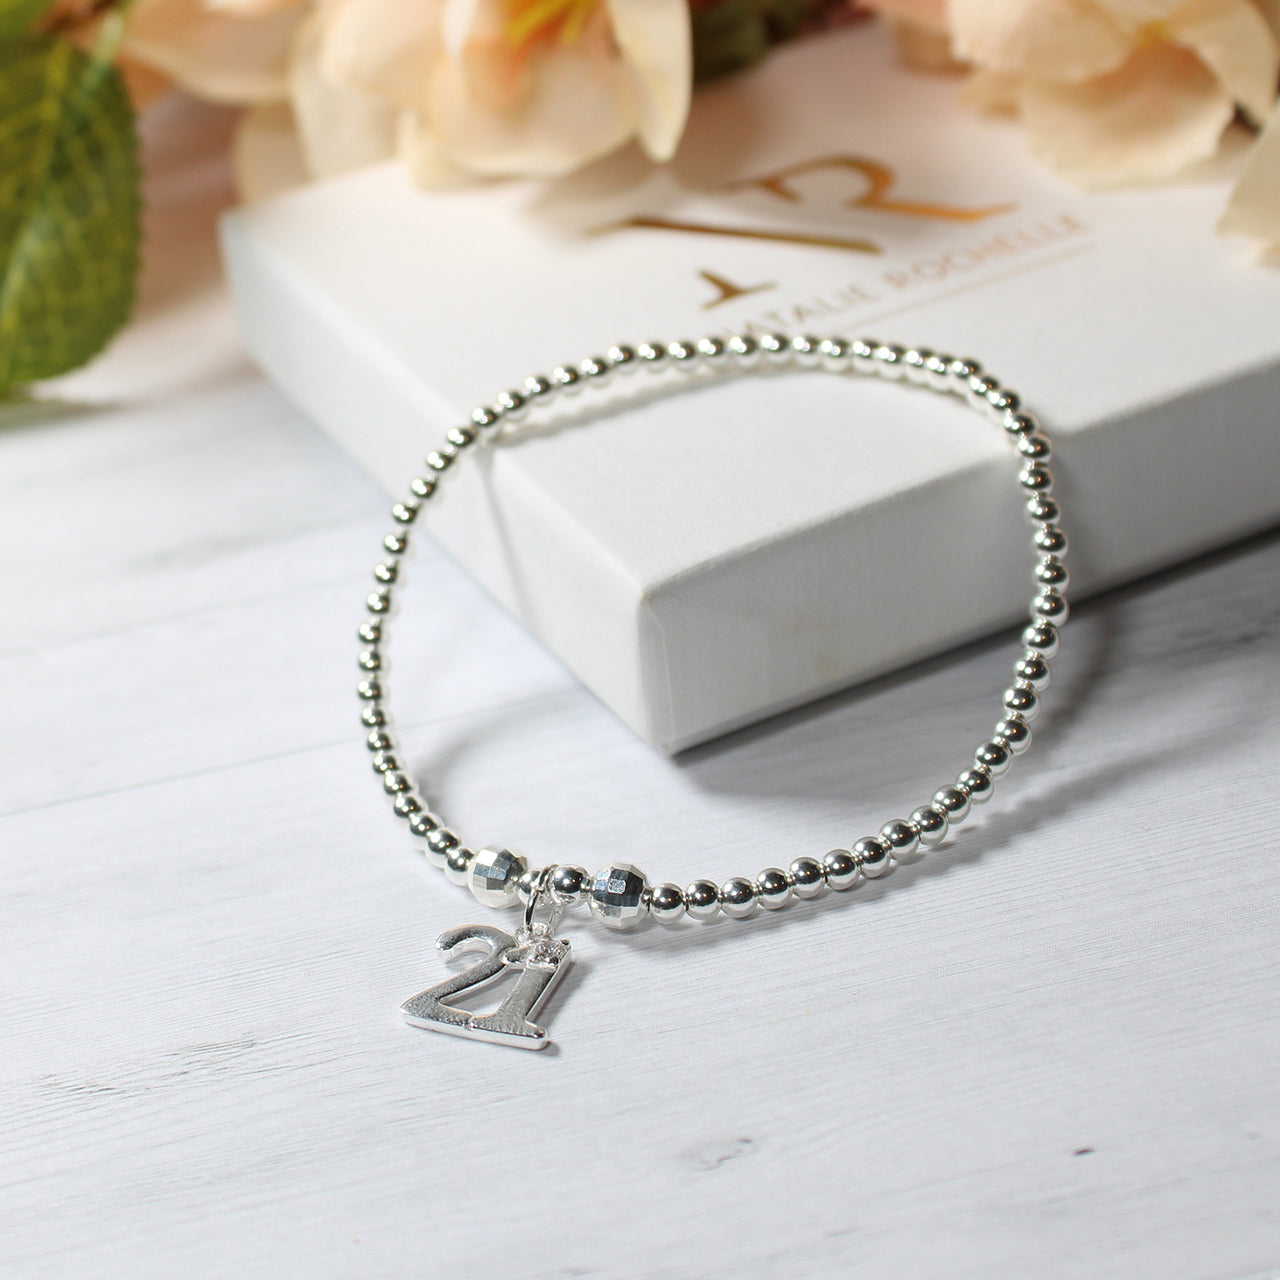 Sterling Silver Stacking Bracelet with 21st Birthday Charm